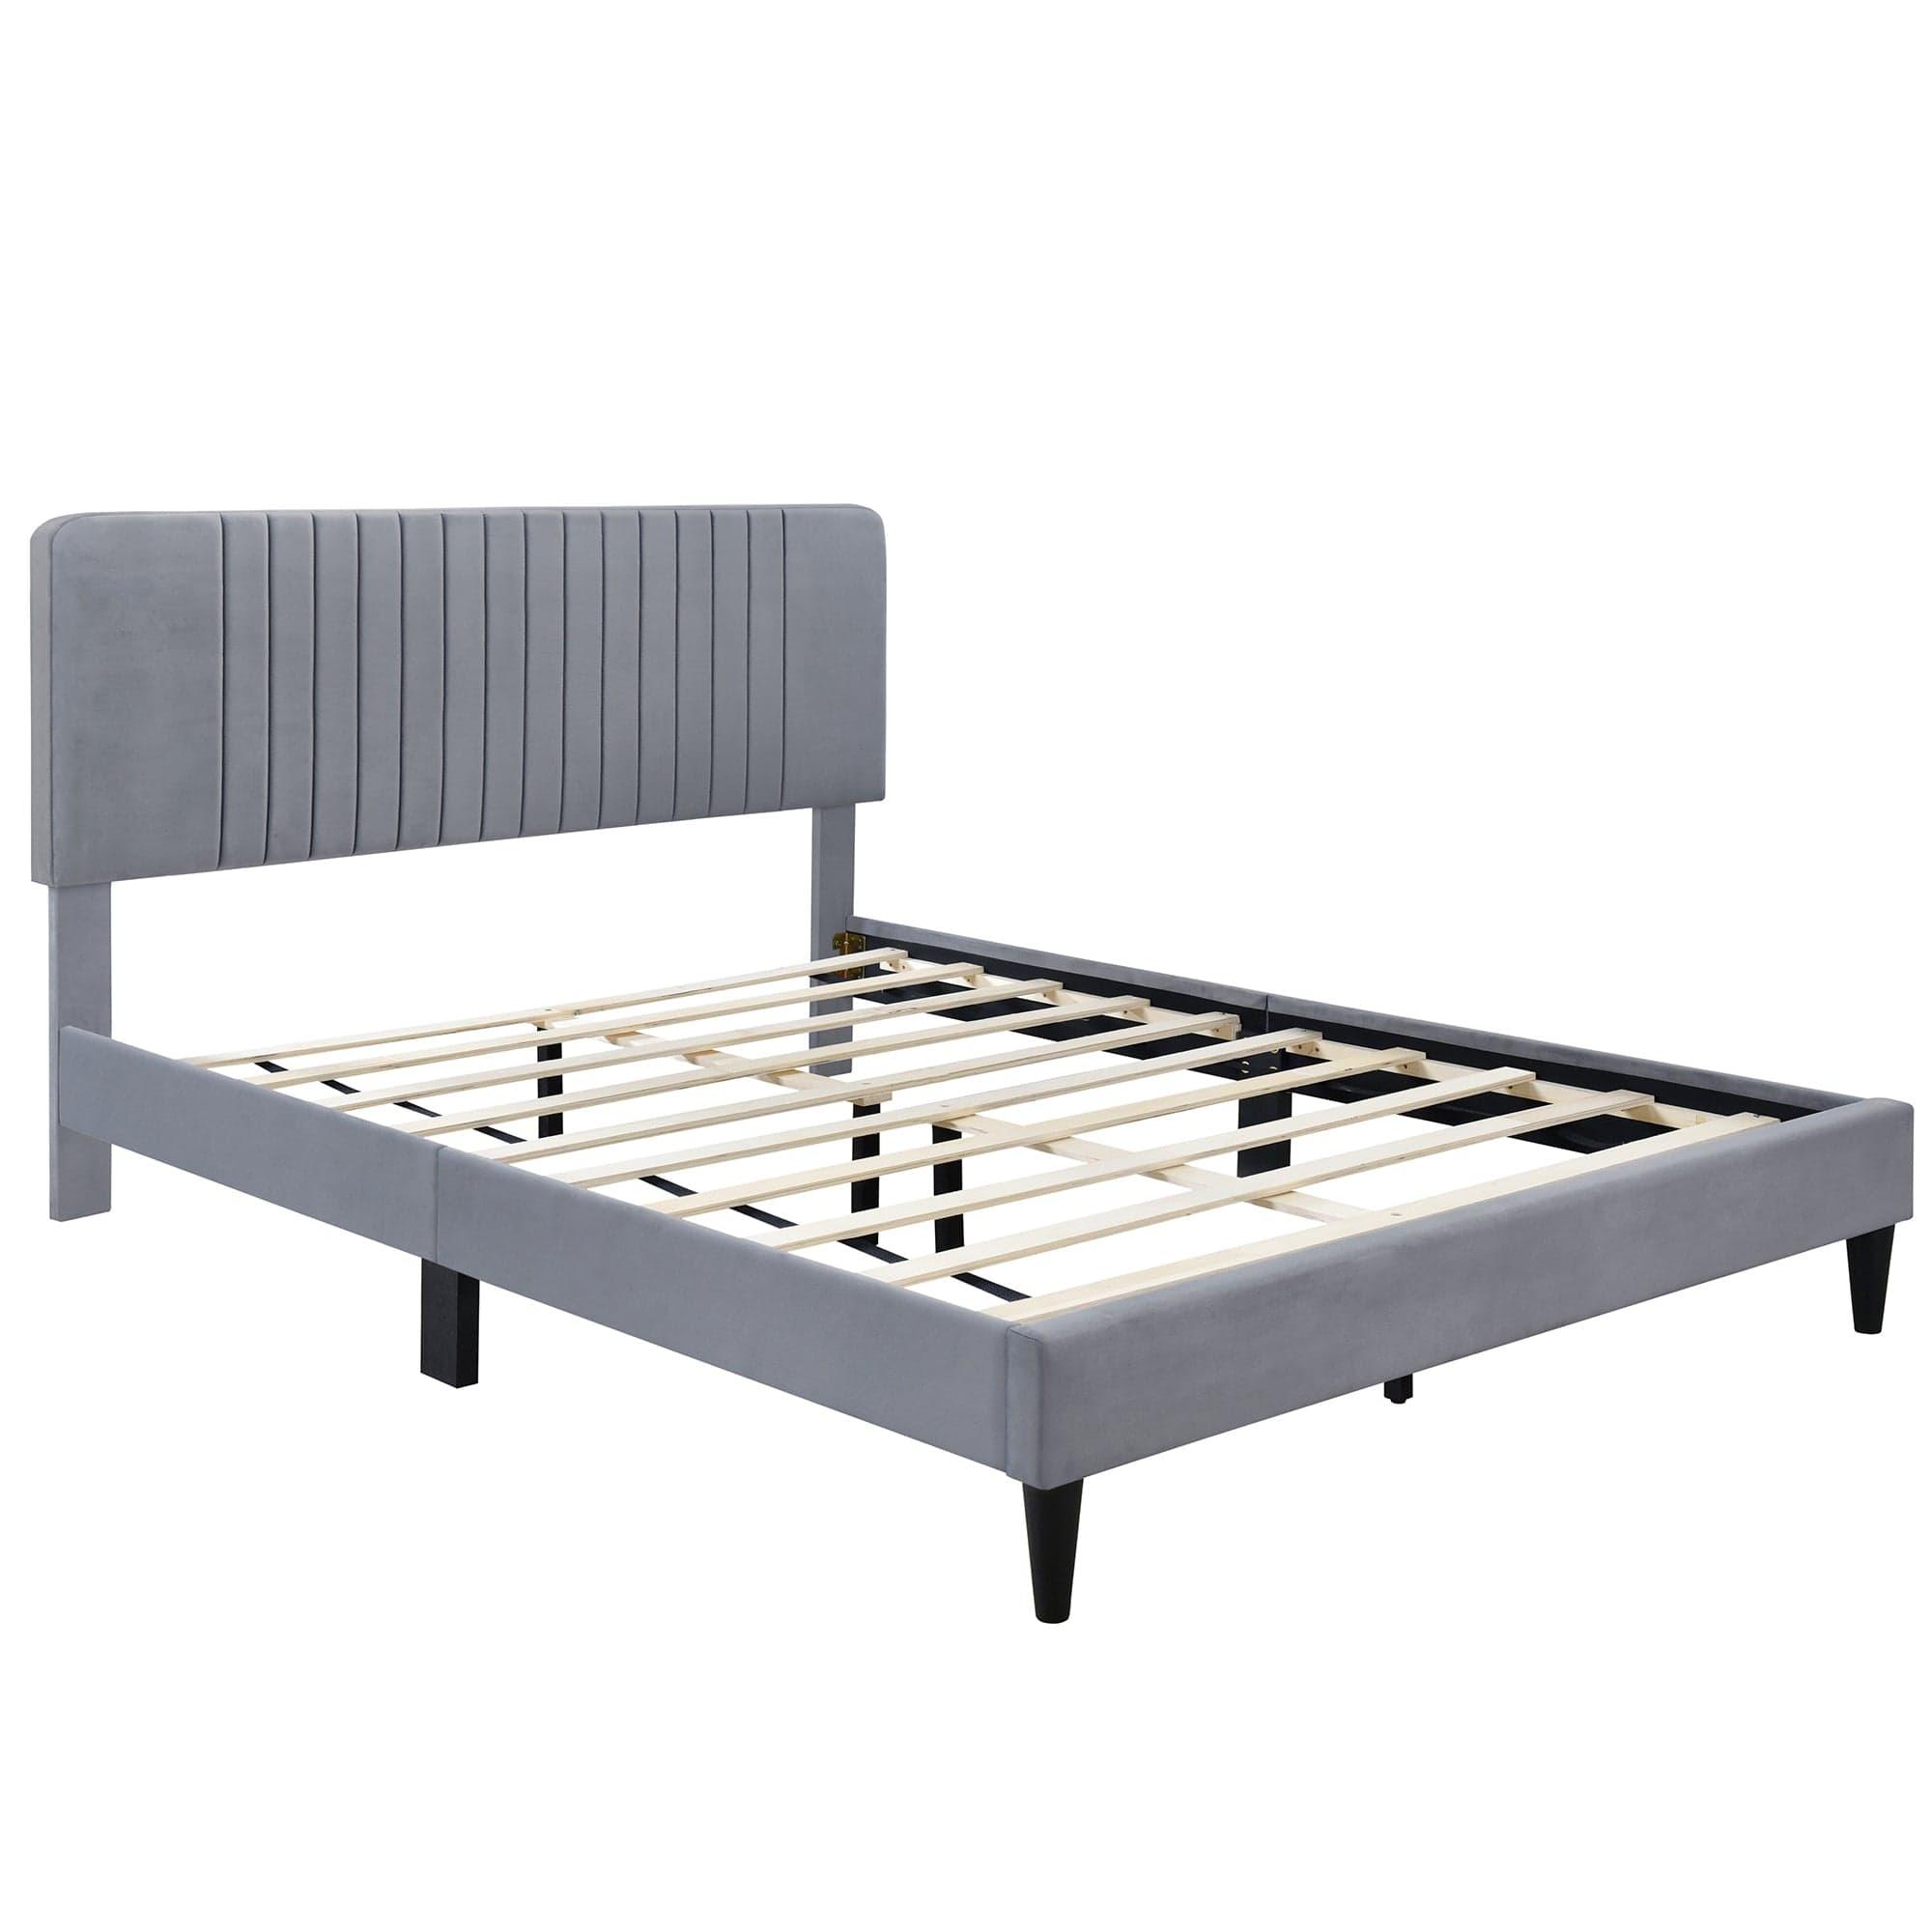 Shop 4-Pieces Bedroom Sets Queen Size Upholstered Platform Bed with Two Nightstands and Storage Bench-Gray Mademoiselle Home Decor